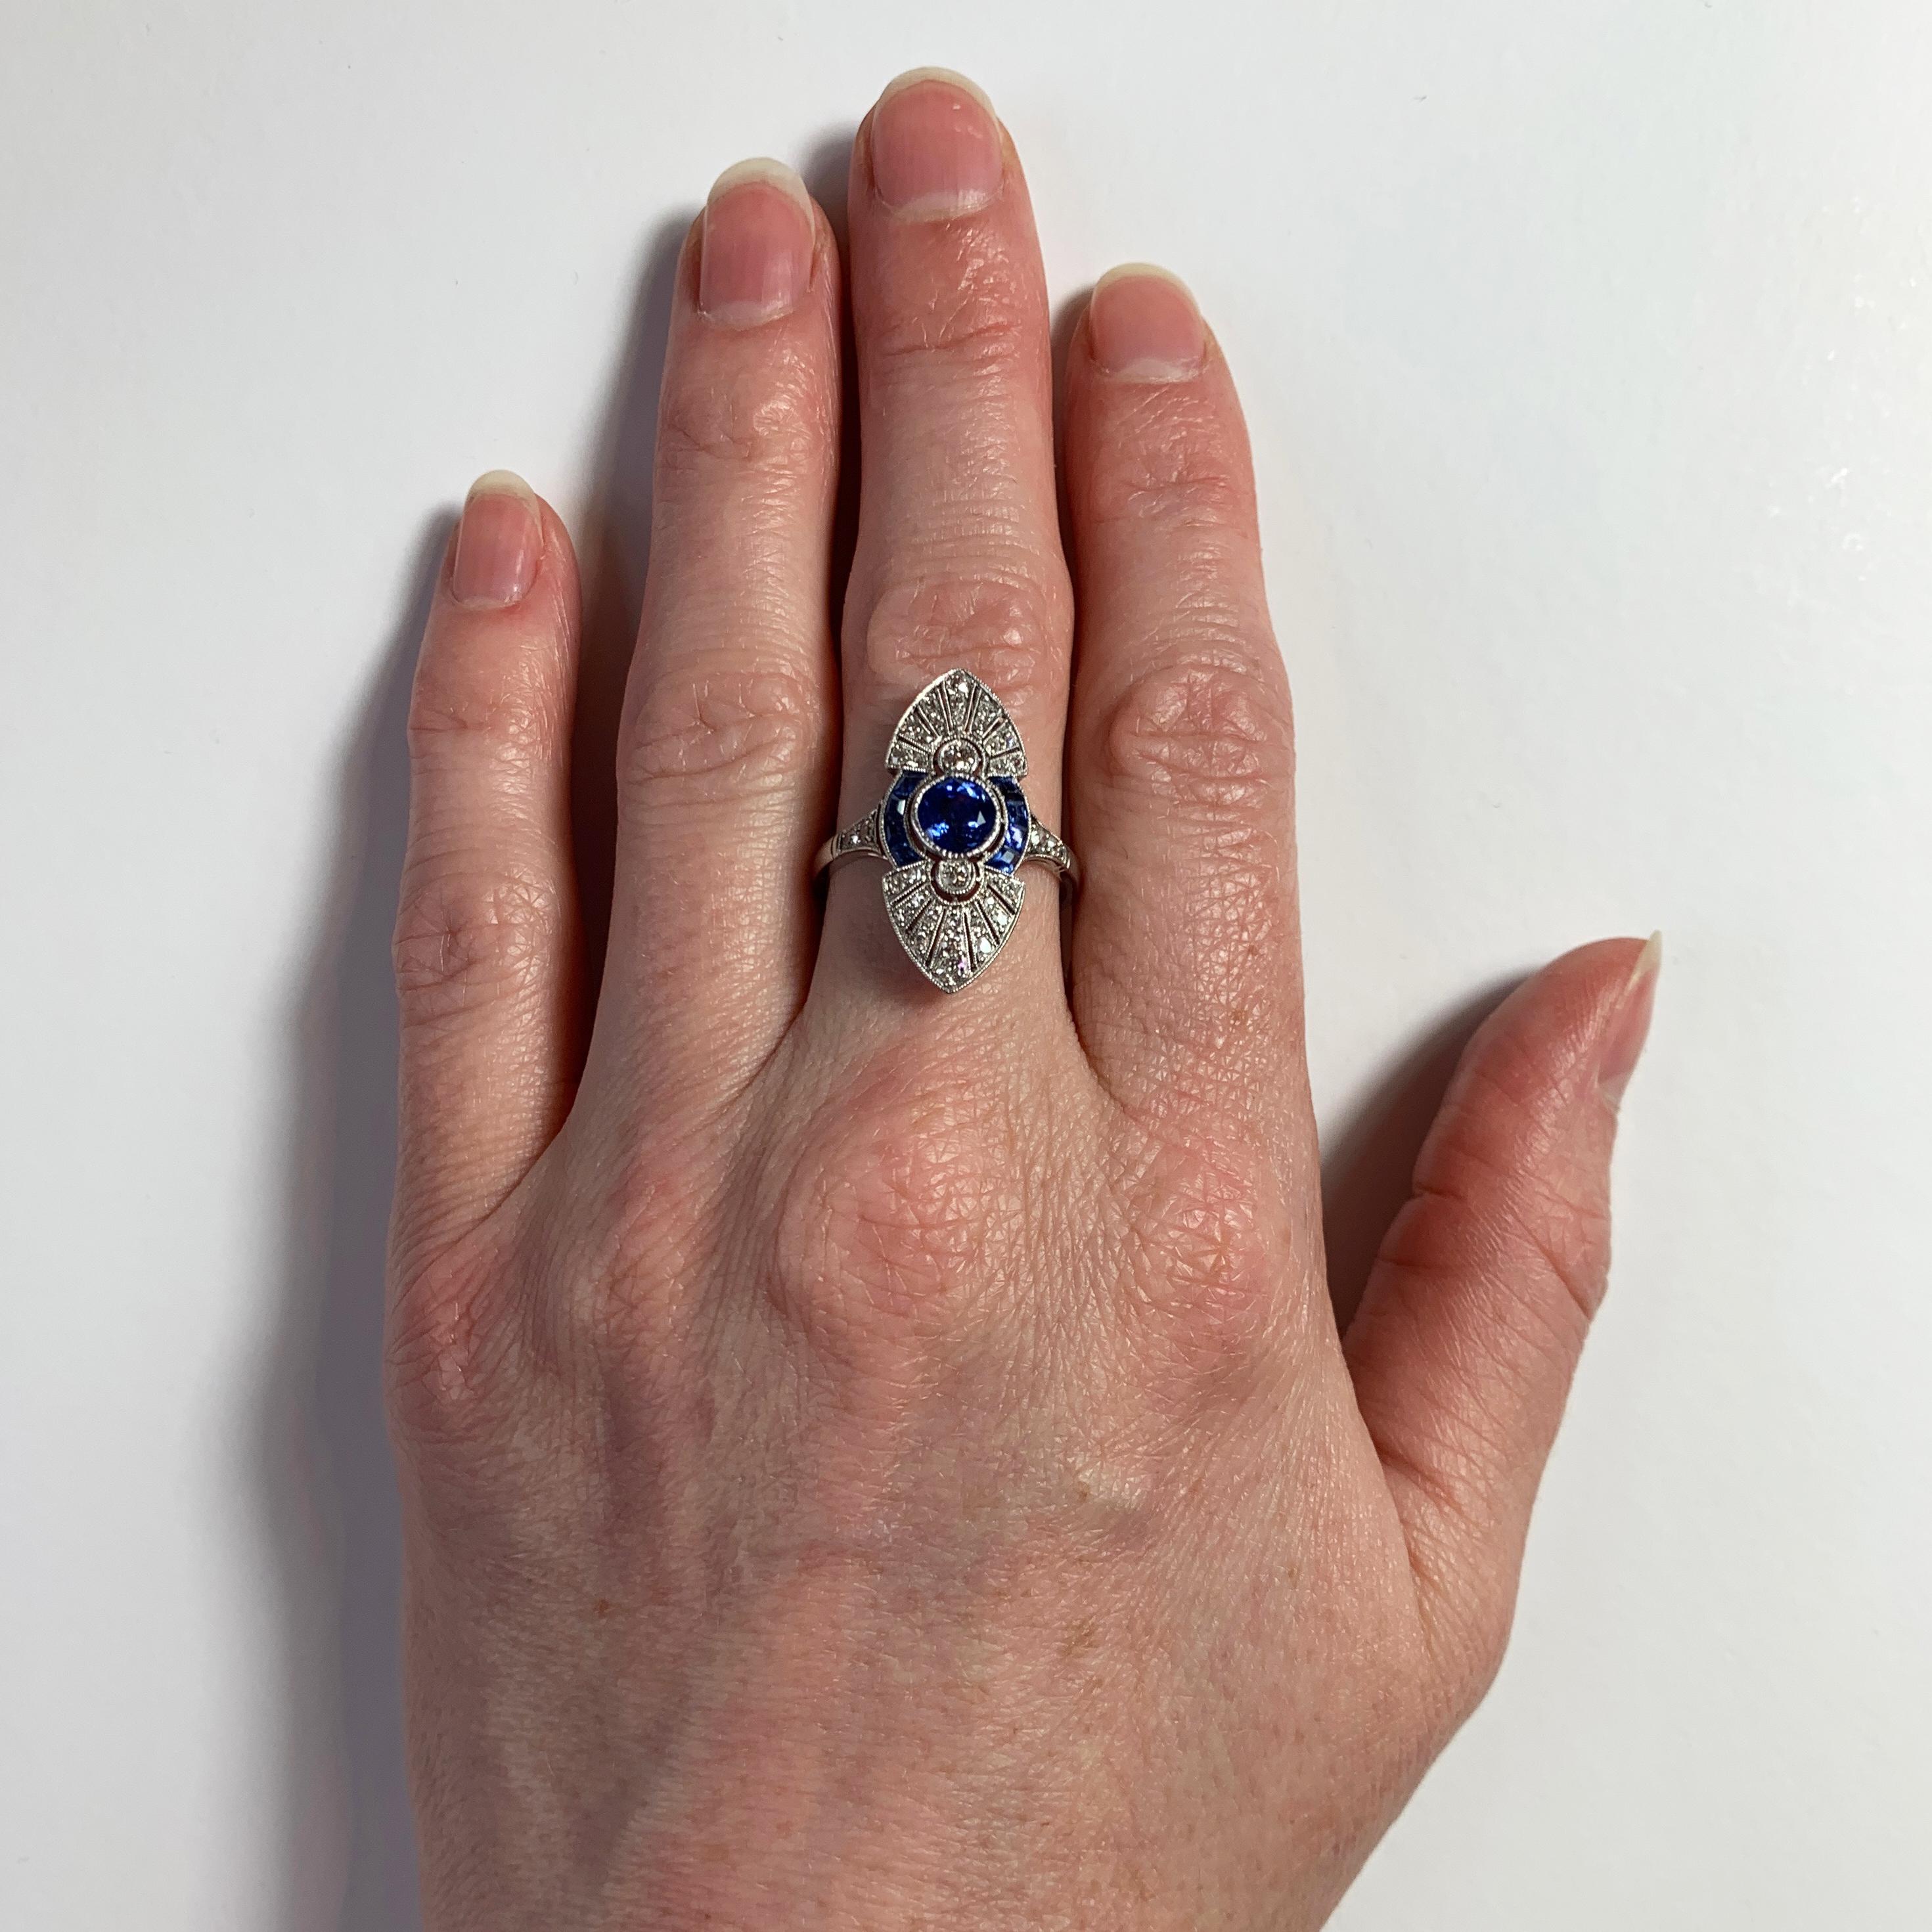 A French platinum, blue sapphire and diamond ring designed as an elongated marquise shape set with a central round mixed cut blue sapphire weighing approximately 0.95 carats, surrounded by eight calibré cut blue sapphires. The ring is further set